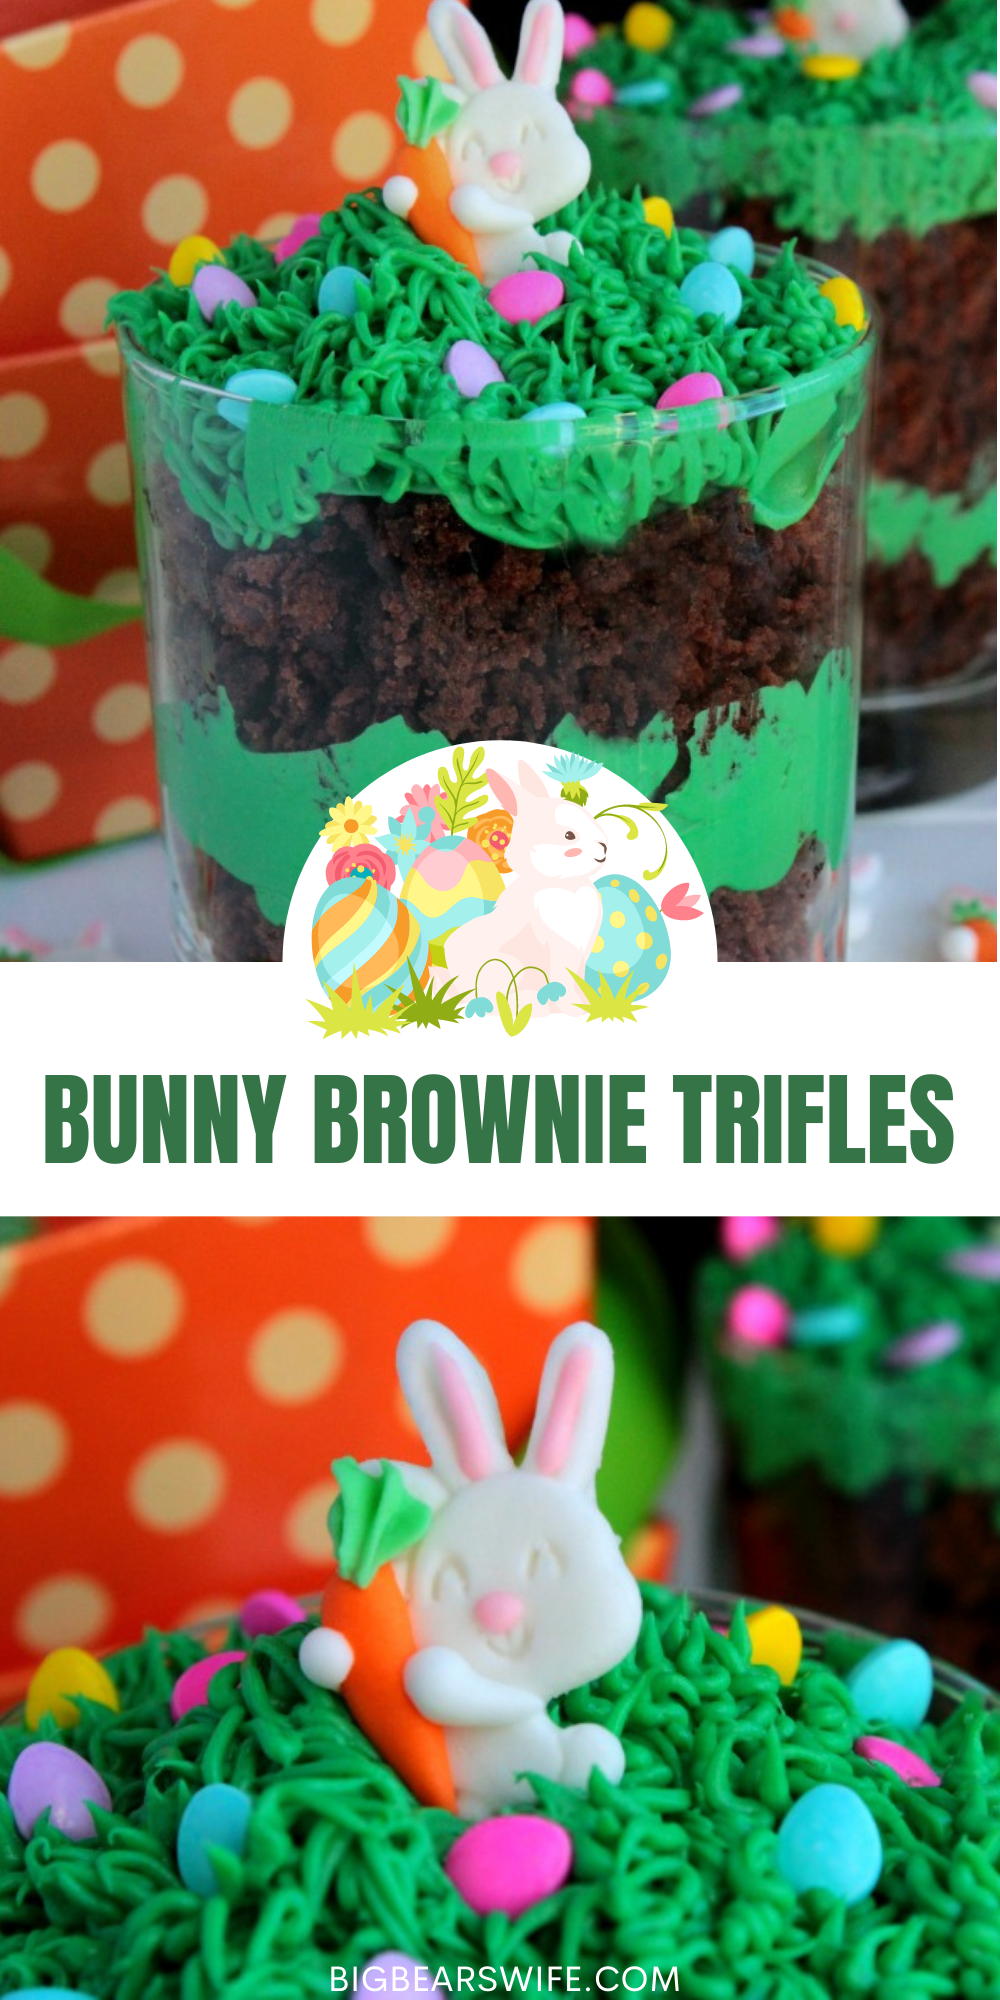 Super easy brownie trifles with cute little sugar bunnies and Easter eggs hidden in the tall grass icing. 

 via @bigbearswife